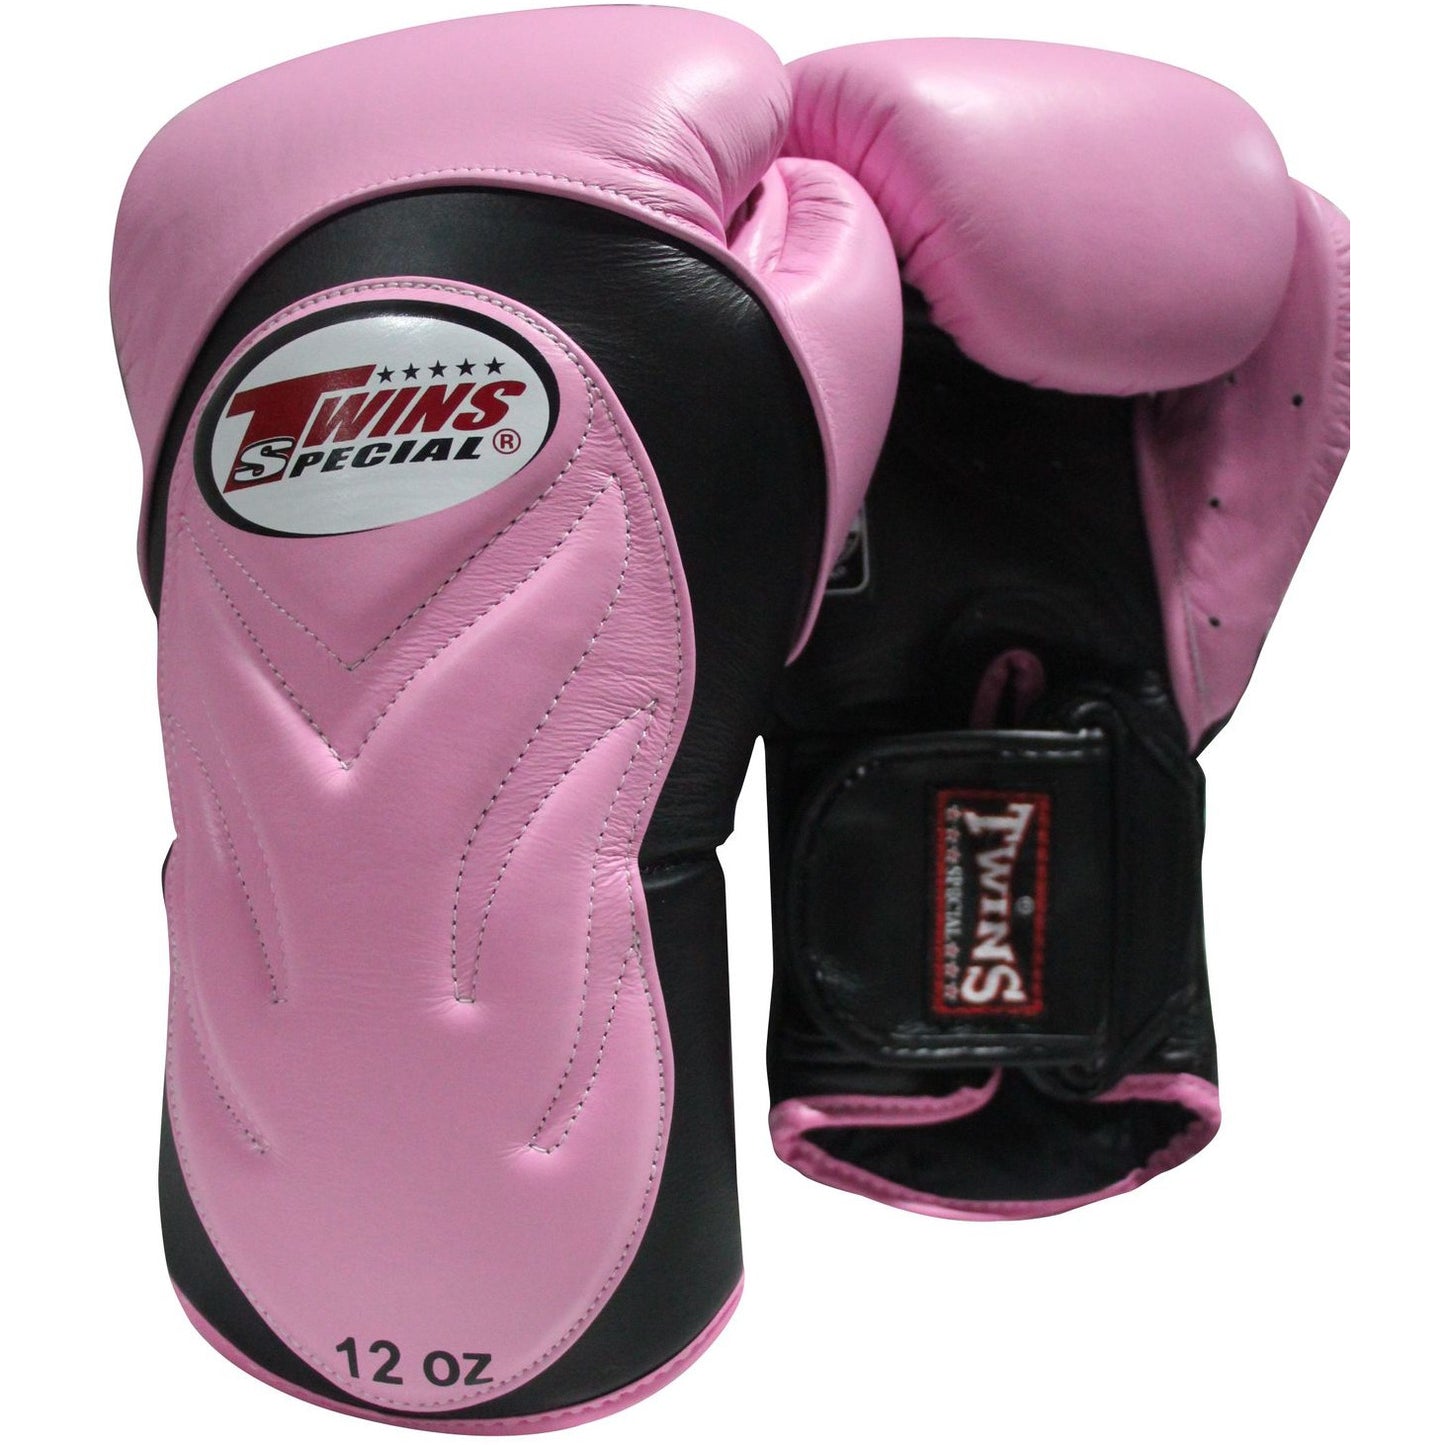 Twins Special Boxing Gloves BGVL6 Black/Pink